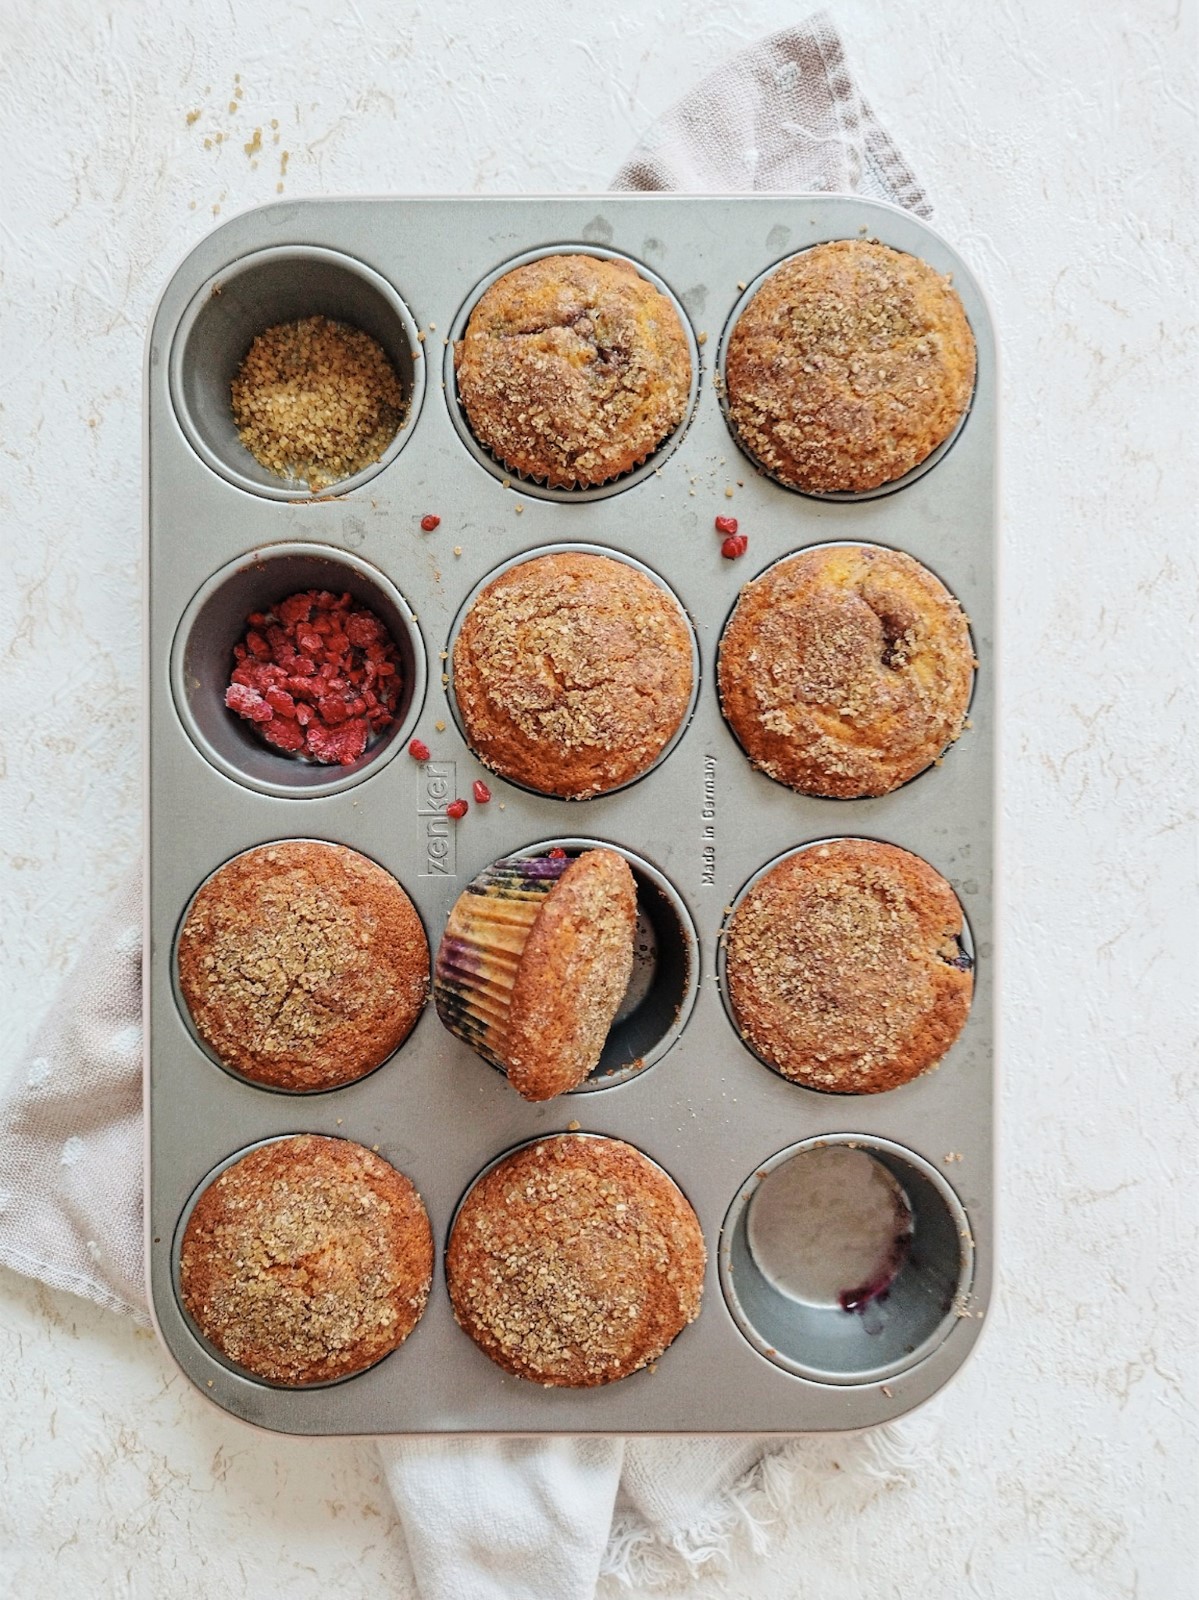 Muffins mit Beeren und Streusel Topping - Muffins with berries and streusel topping